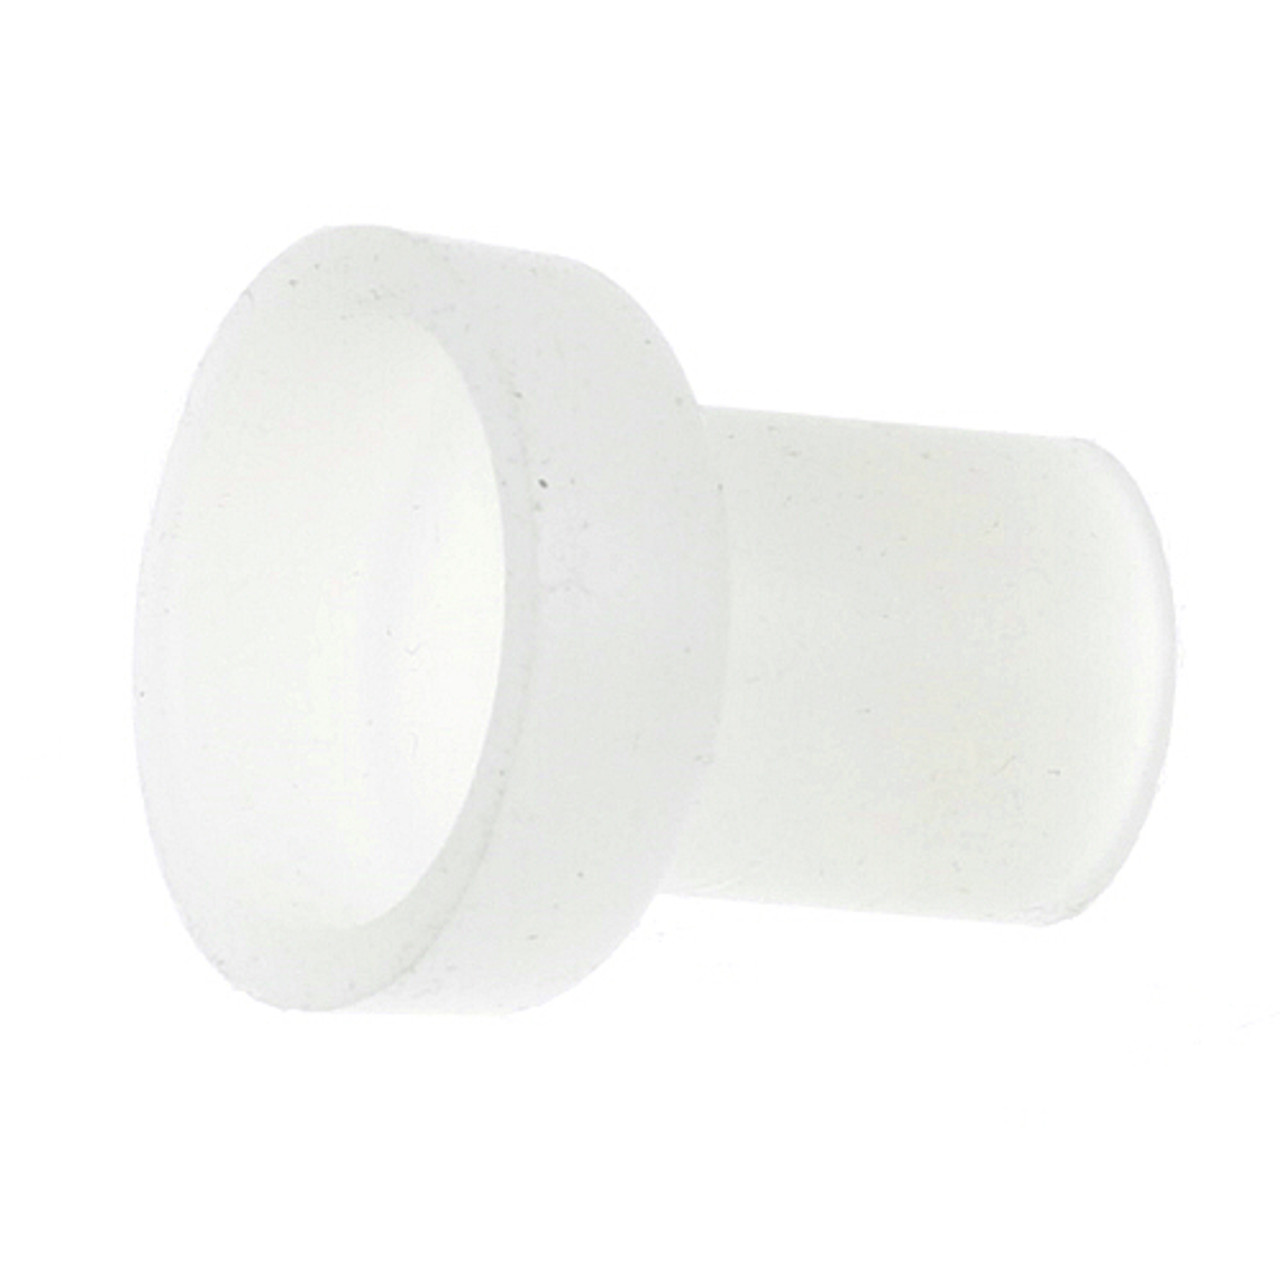 Small Seat Cup - Replacement Part For Bunn BU02766.0000